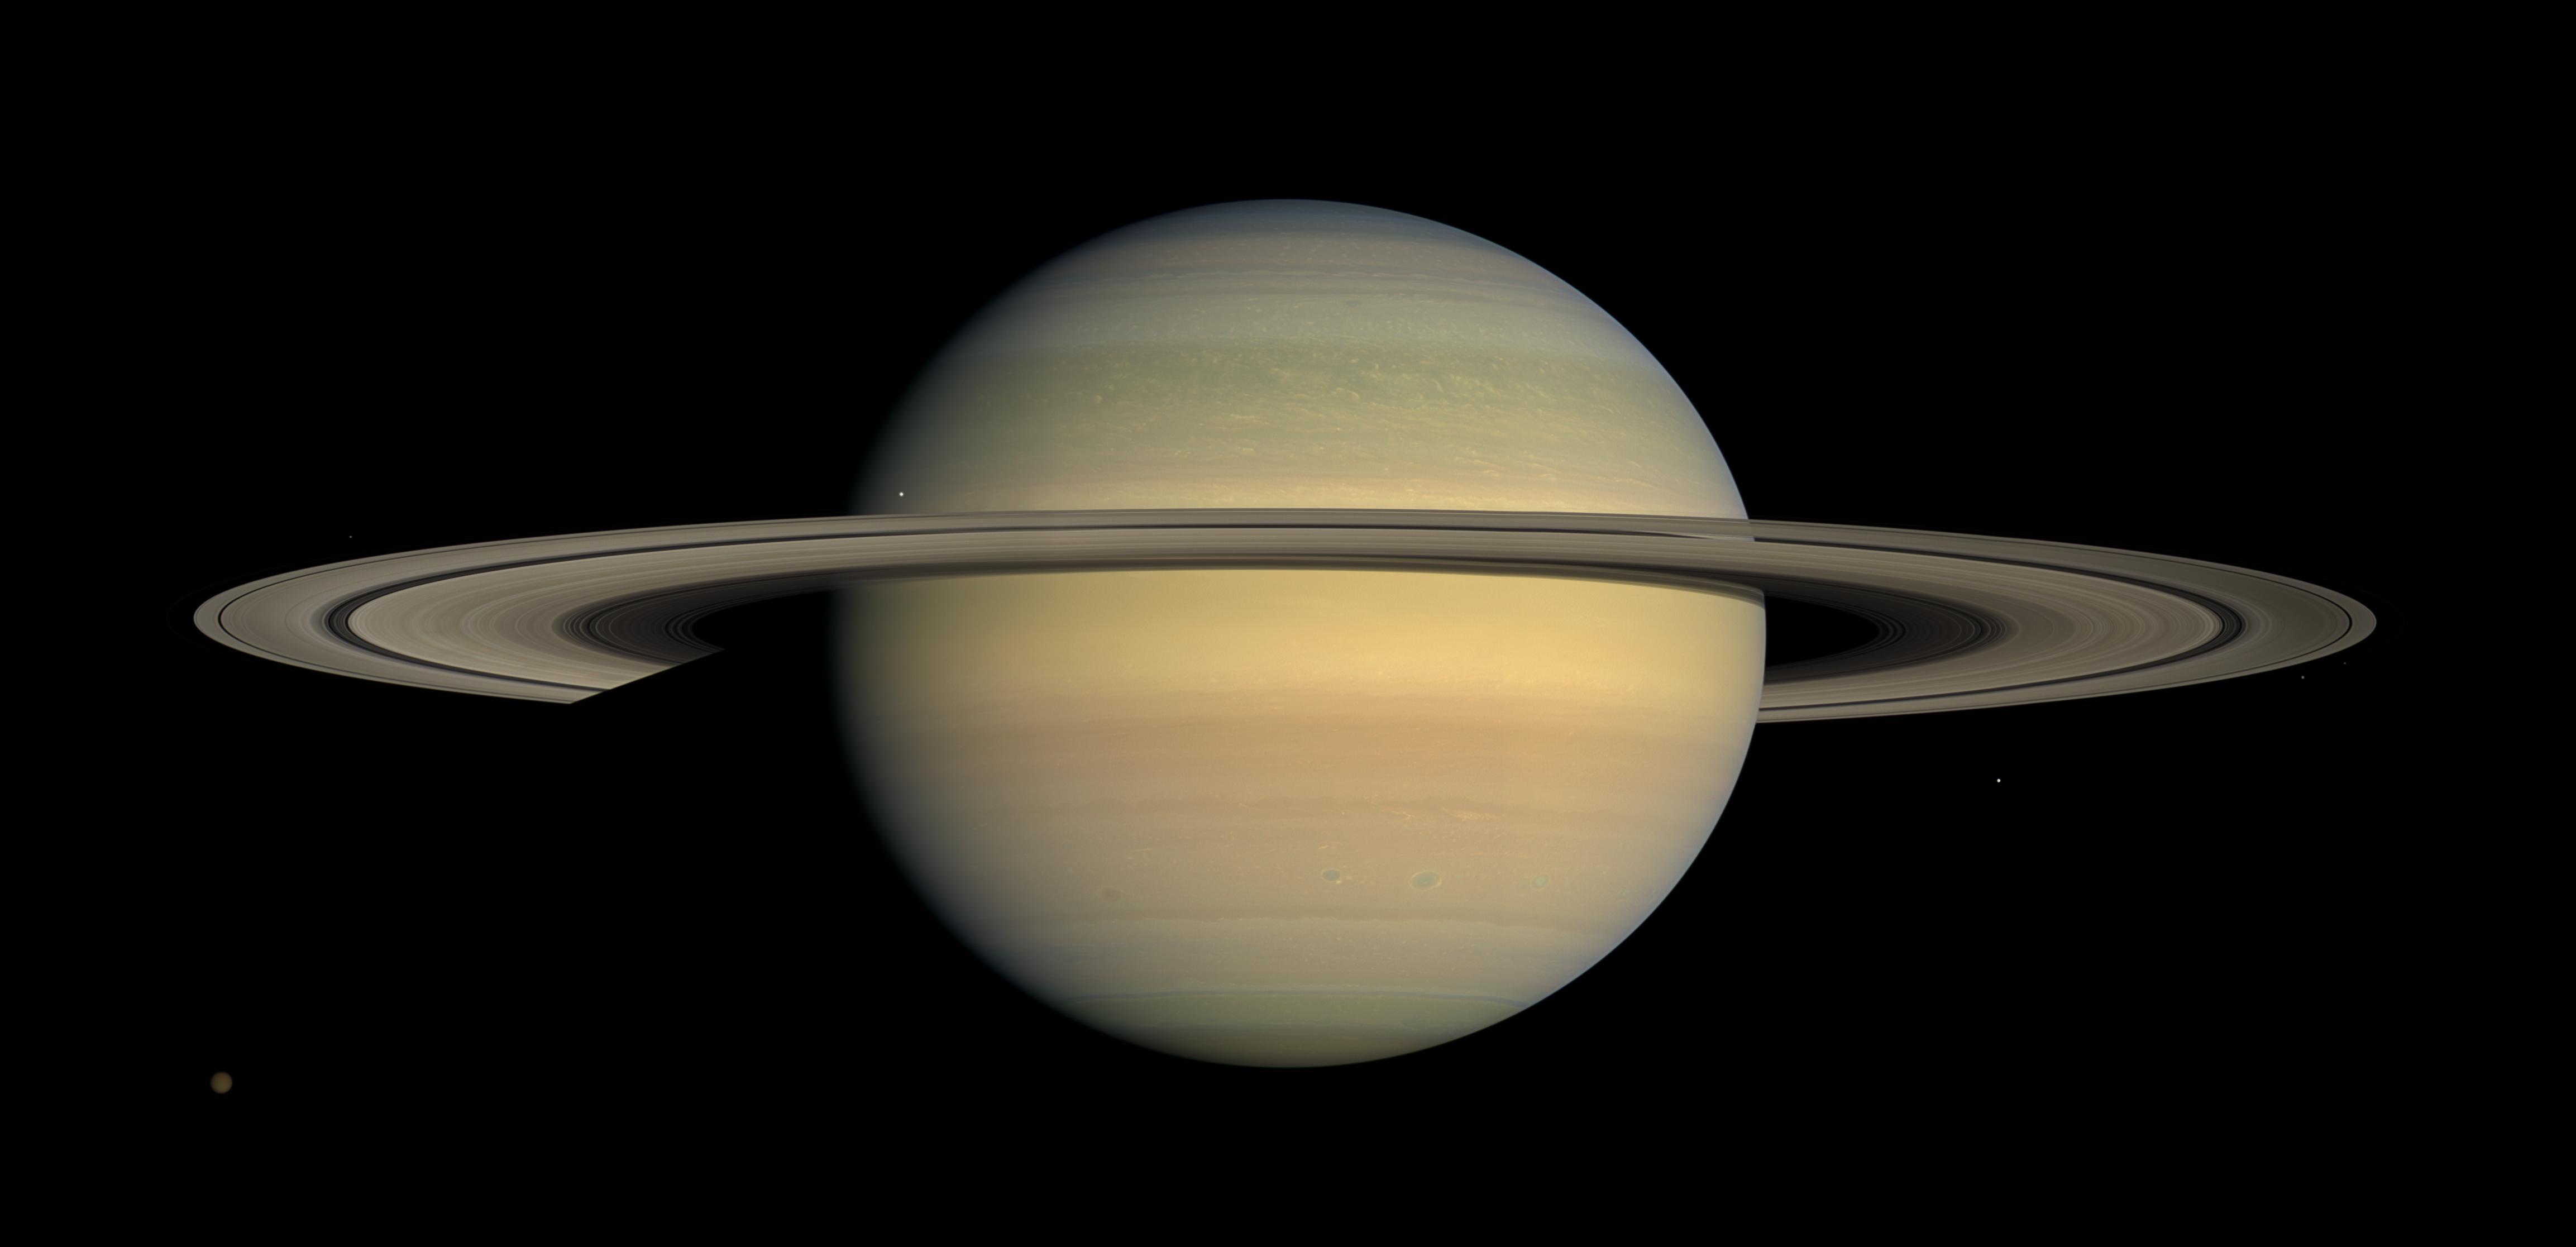 Saturn Spacecraft Not Affected by Hypothetical Planet 9